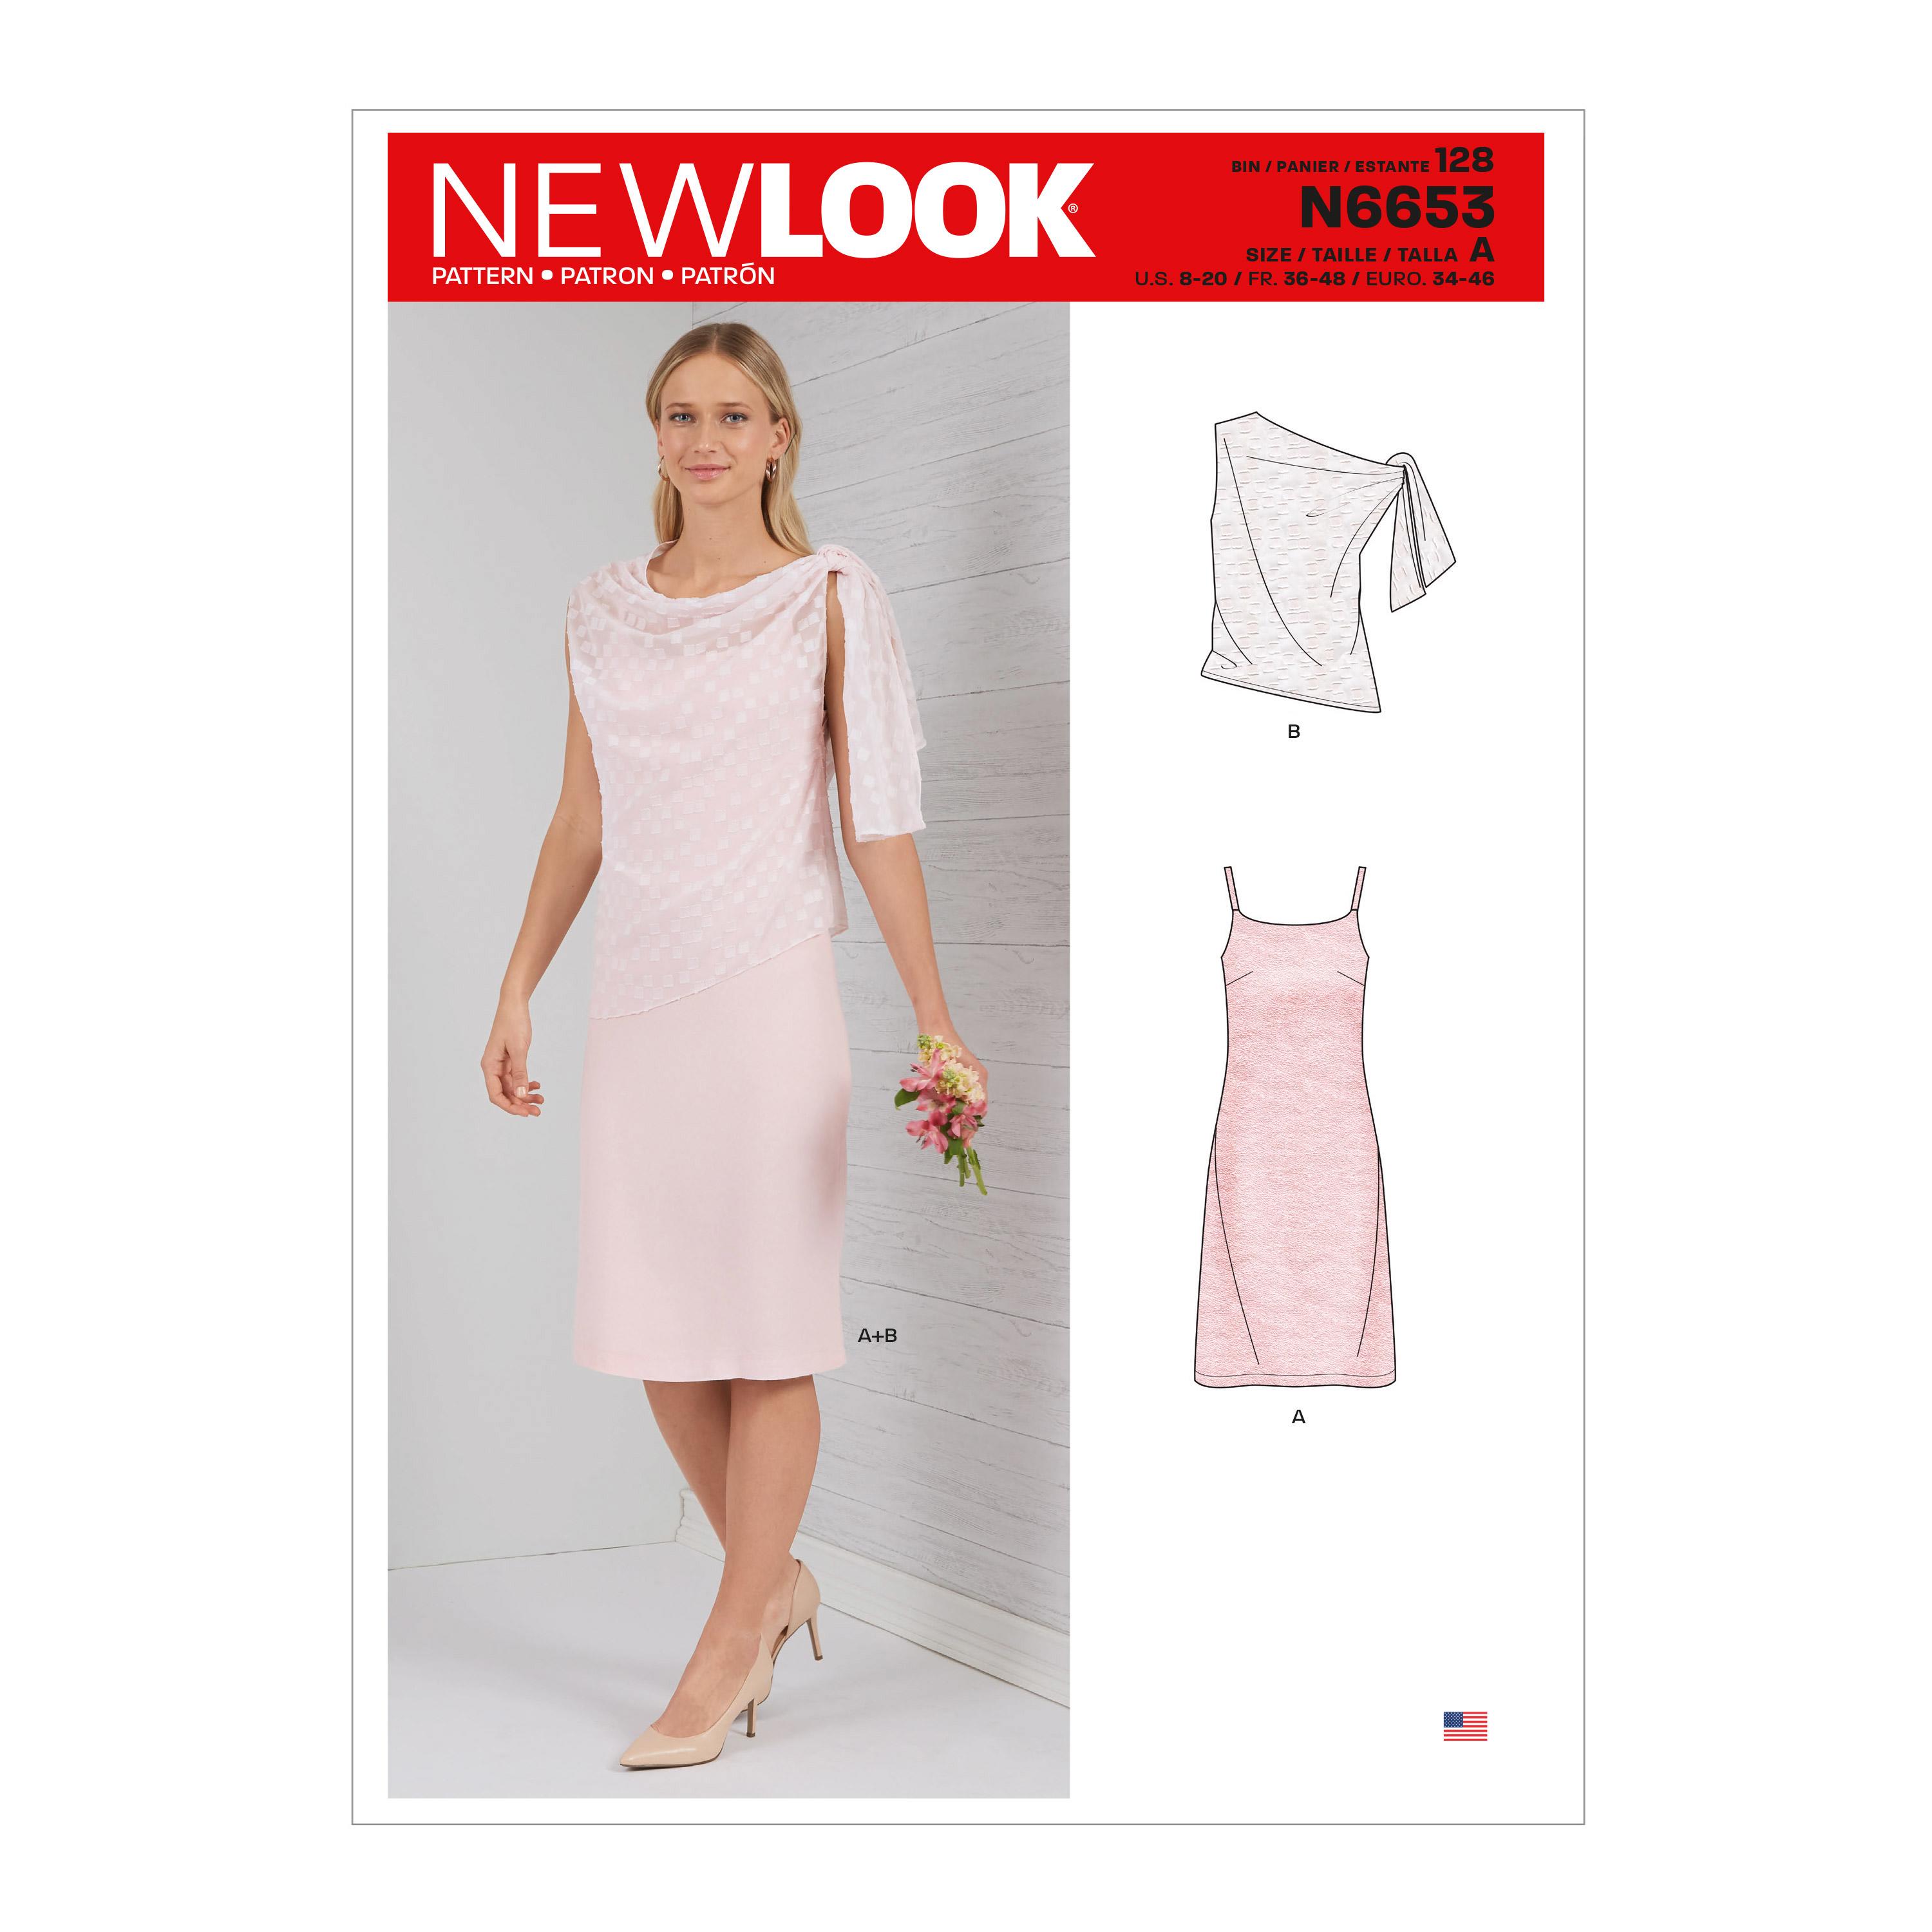 New Look Sewing Pattern N6653 Misses' Dress With Shoulder Tie Topper